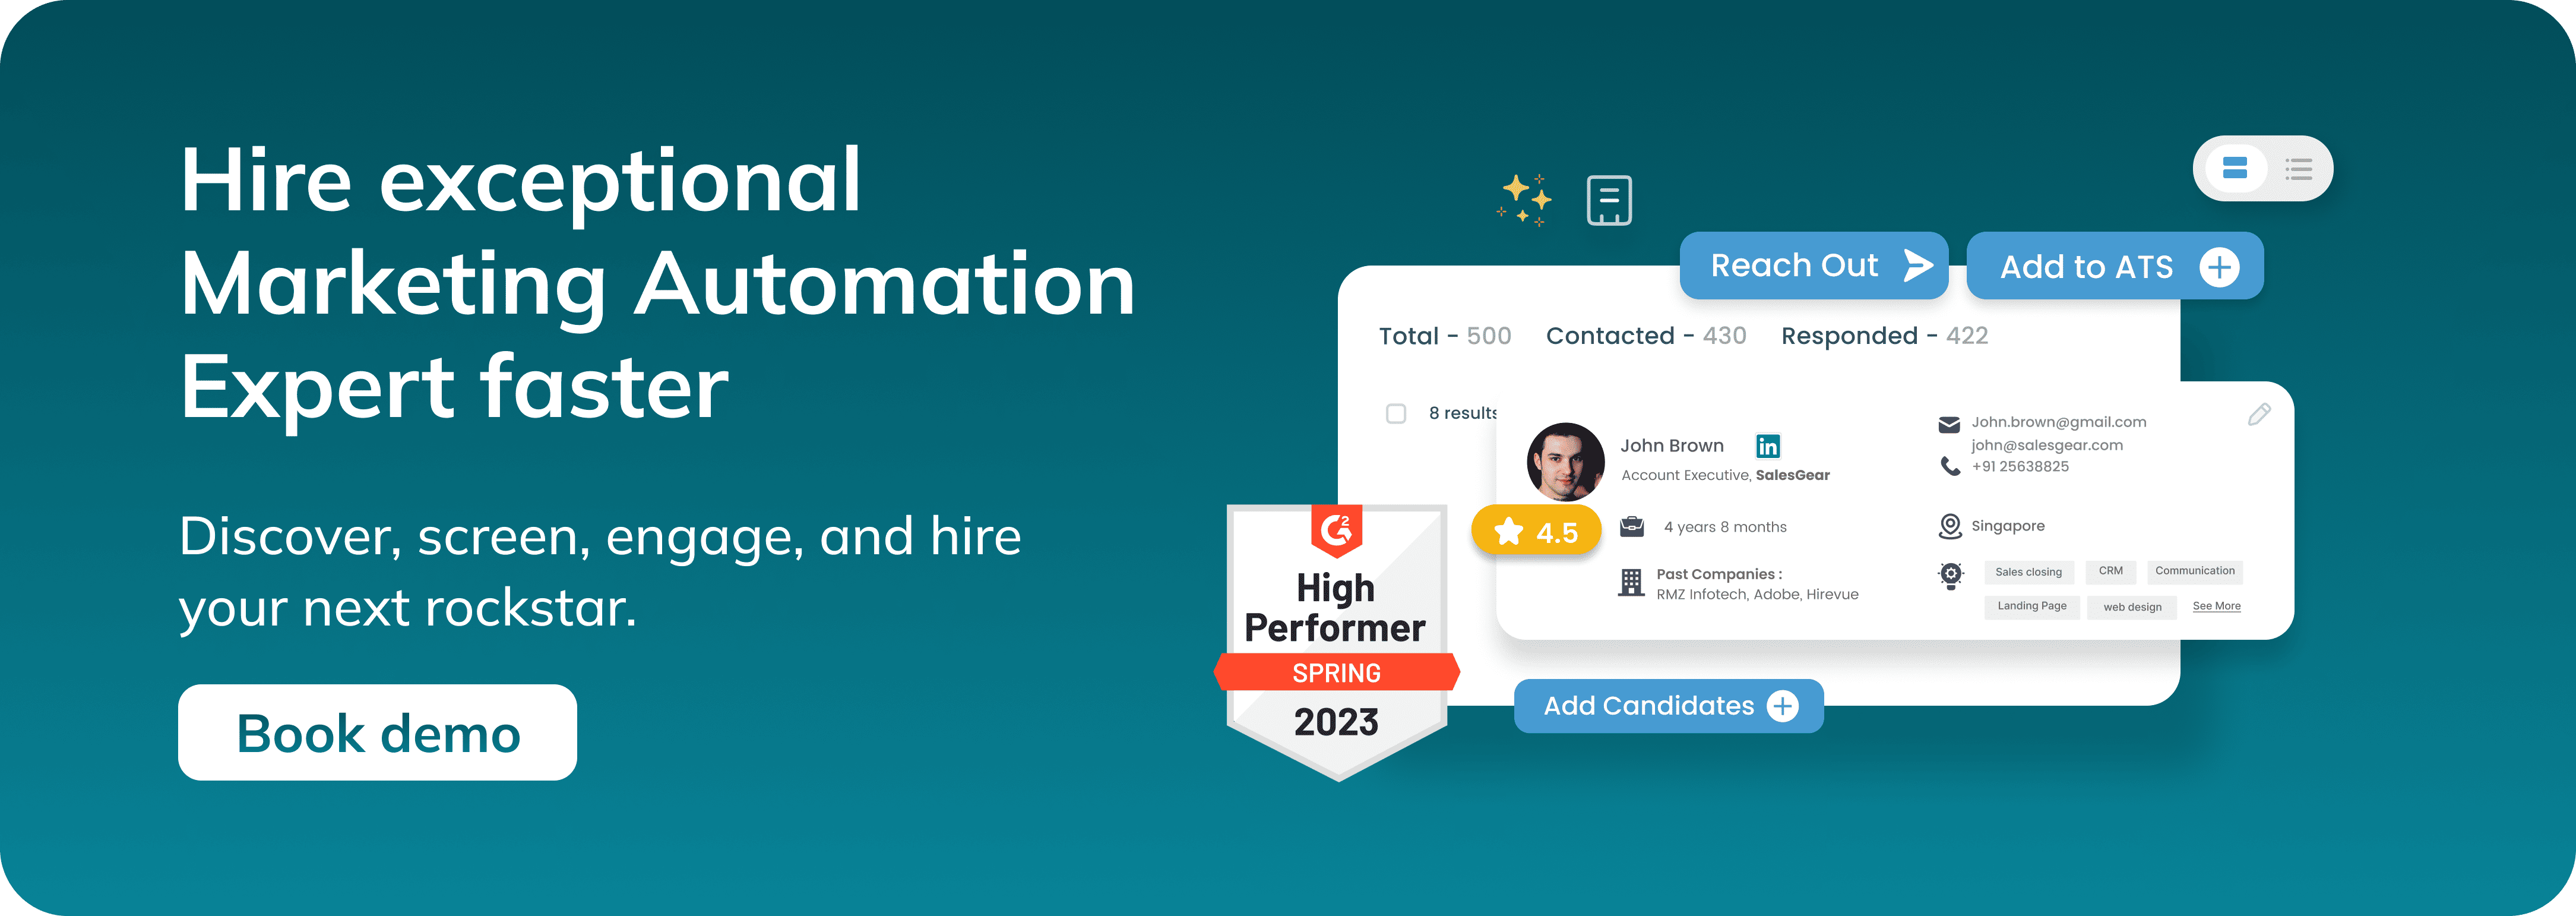 How to hire the perfect Marketing Automation Expert.png